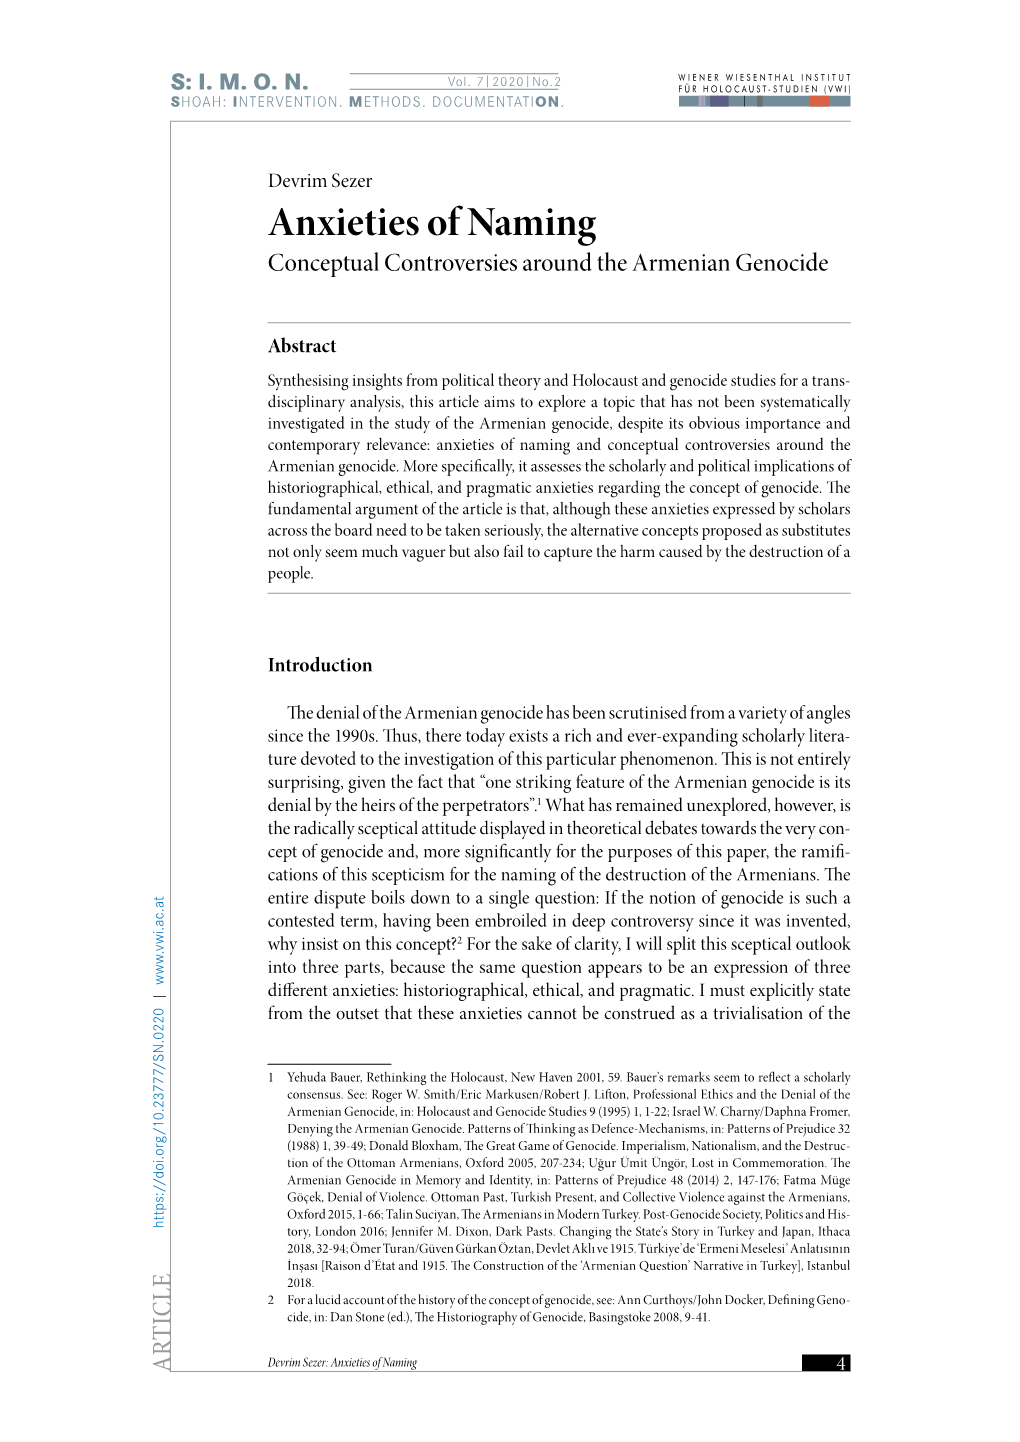 Anxieties of Naming Conceptual Controversies Around the Armenian Genocide